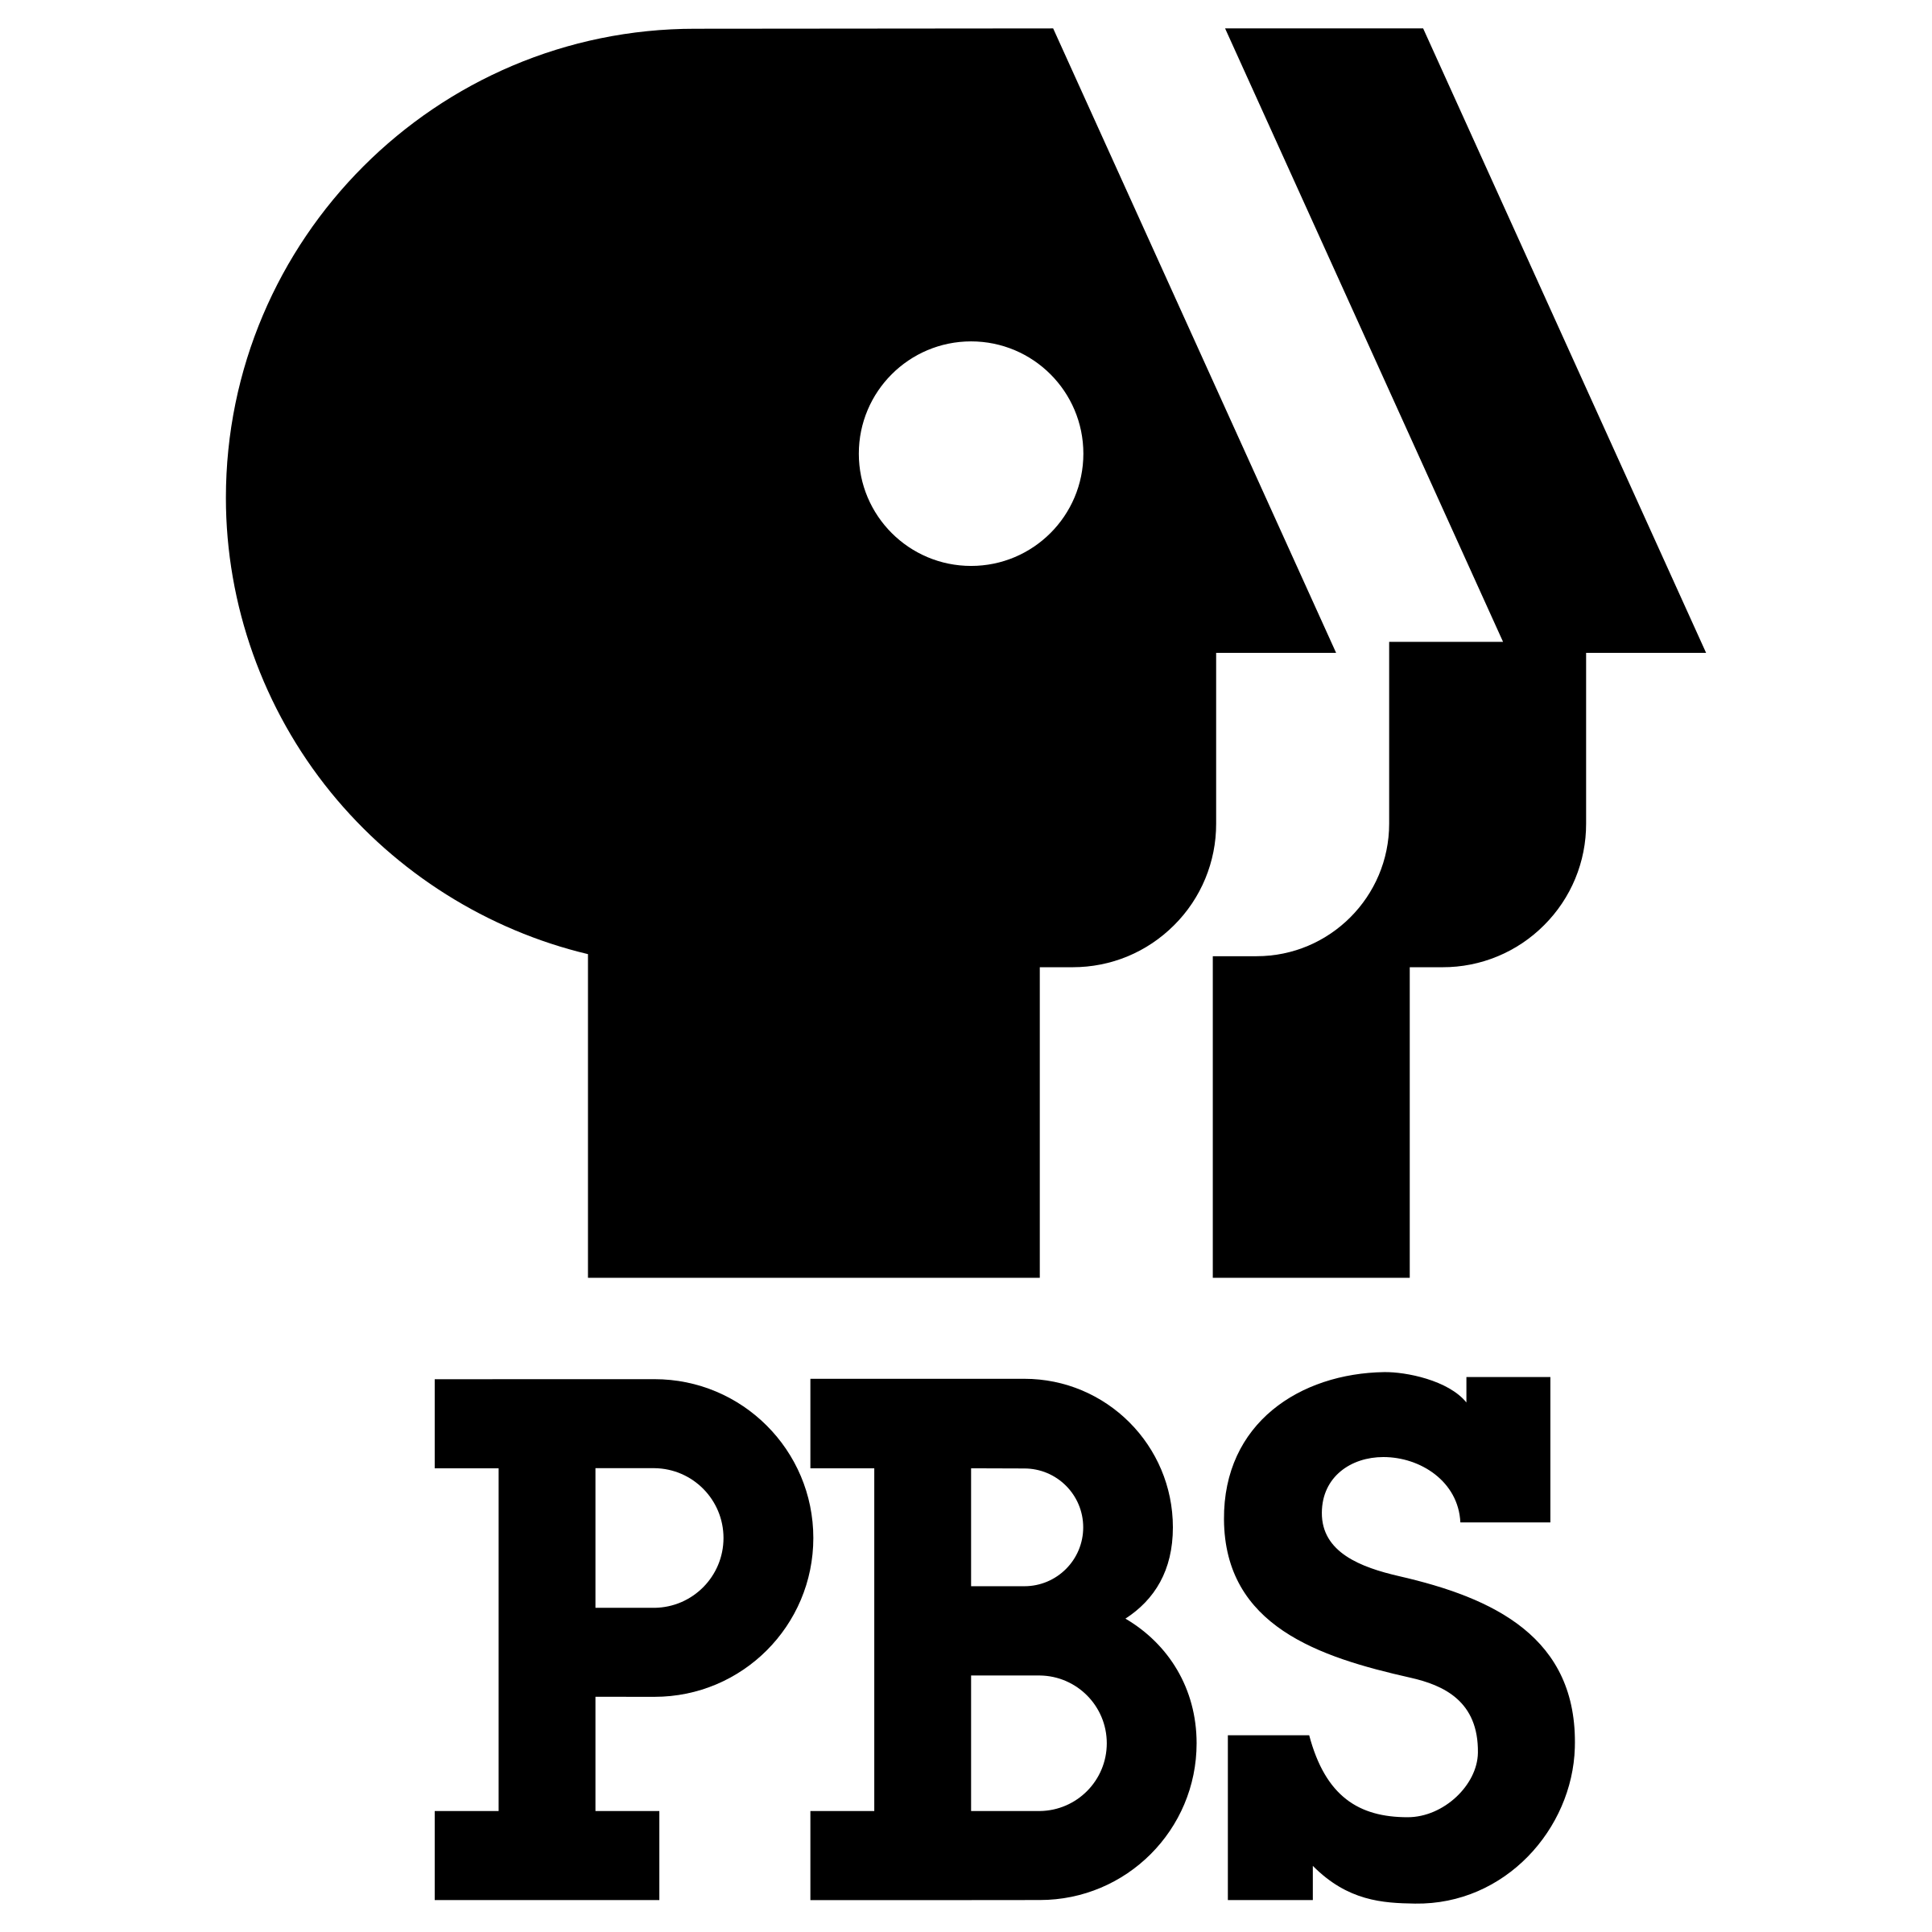 pbs-3-logo-black-and-white.png